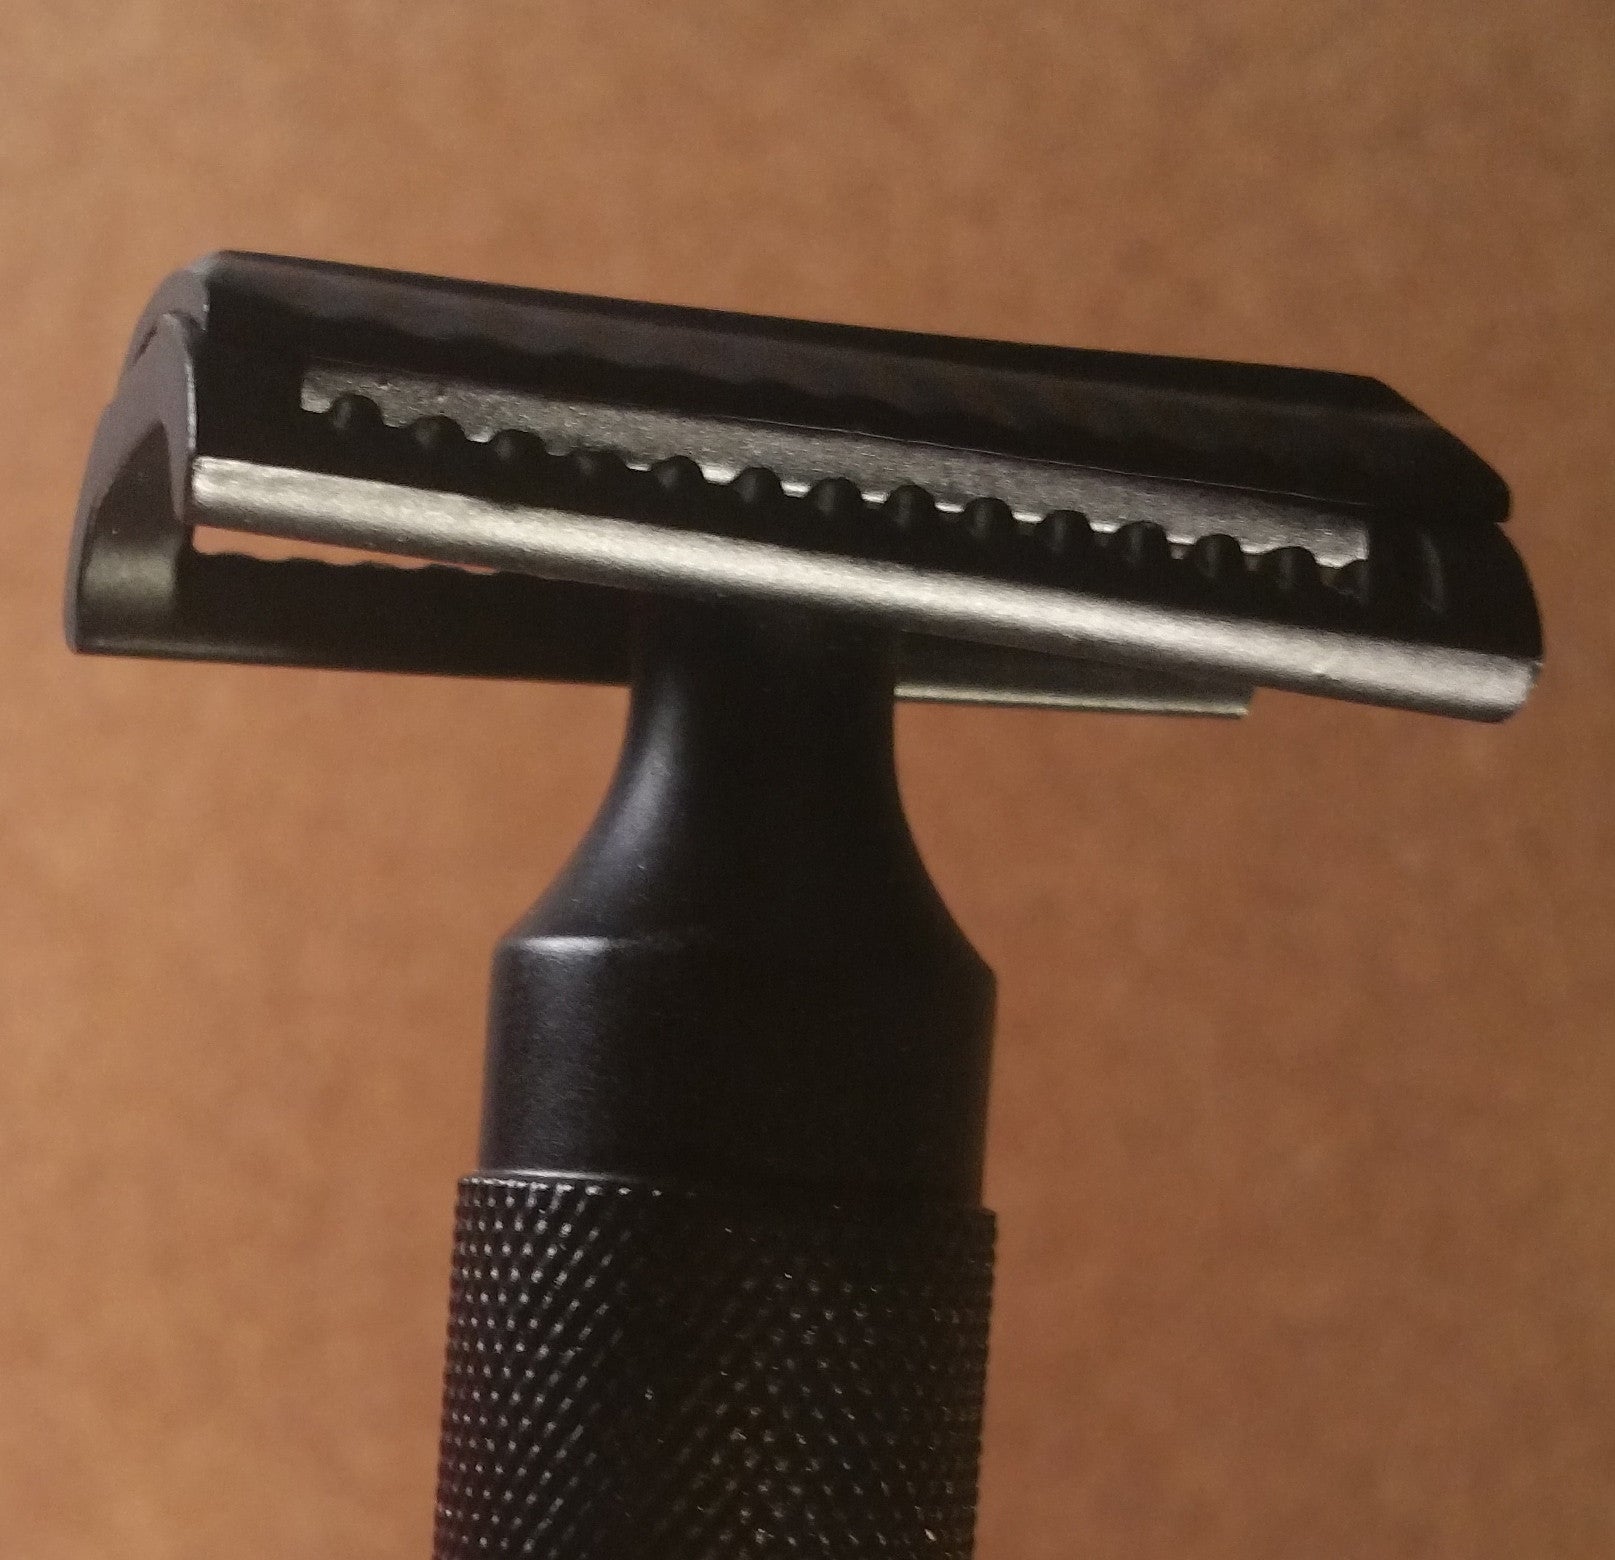 How to shave with a safety razor